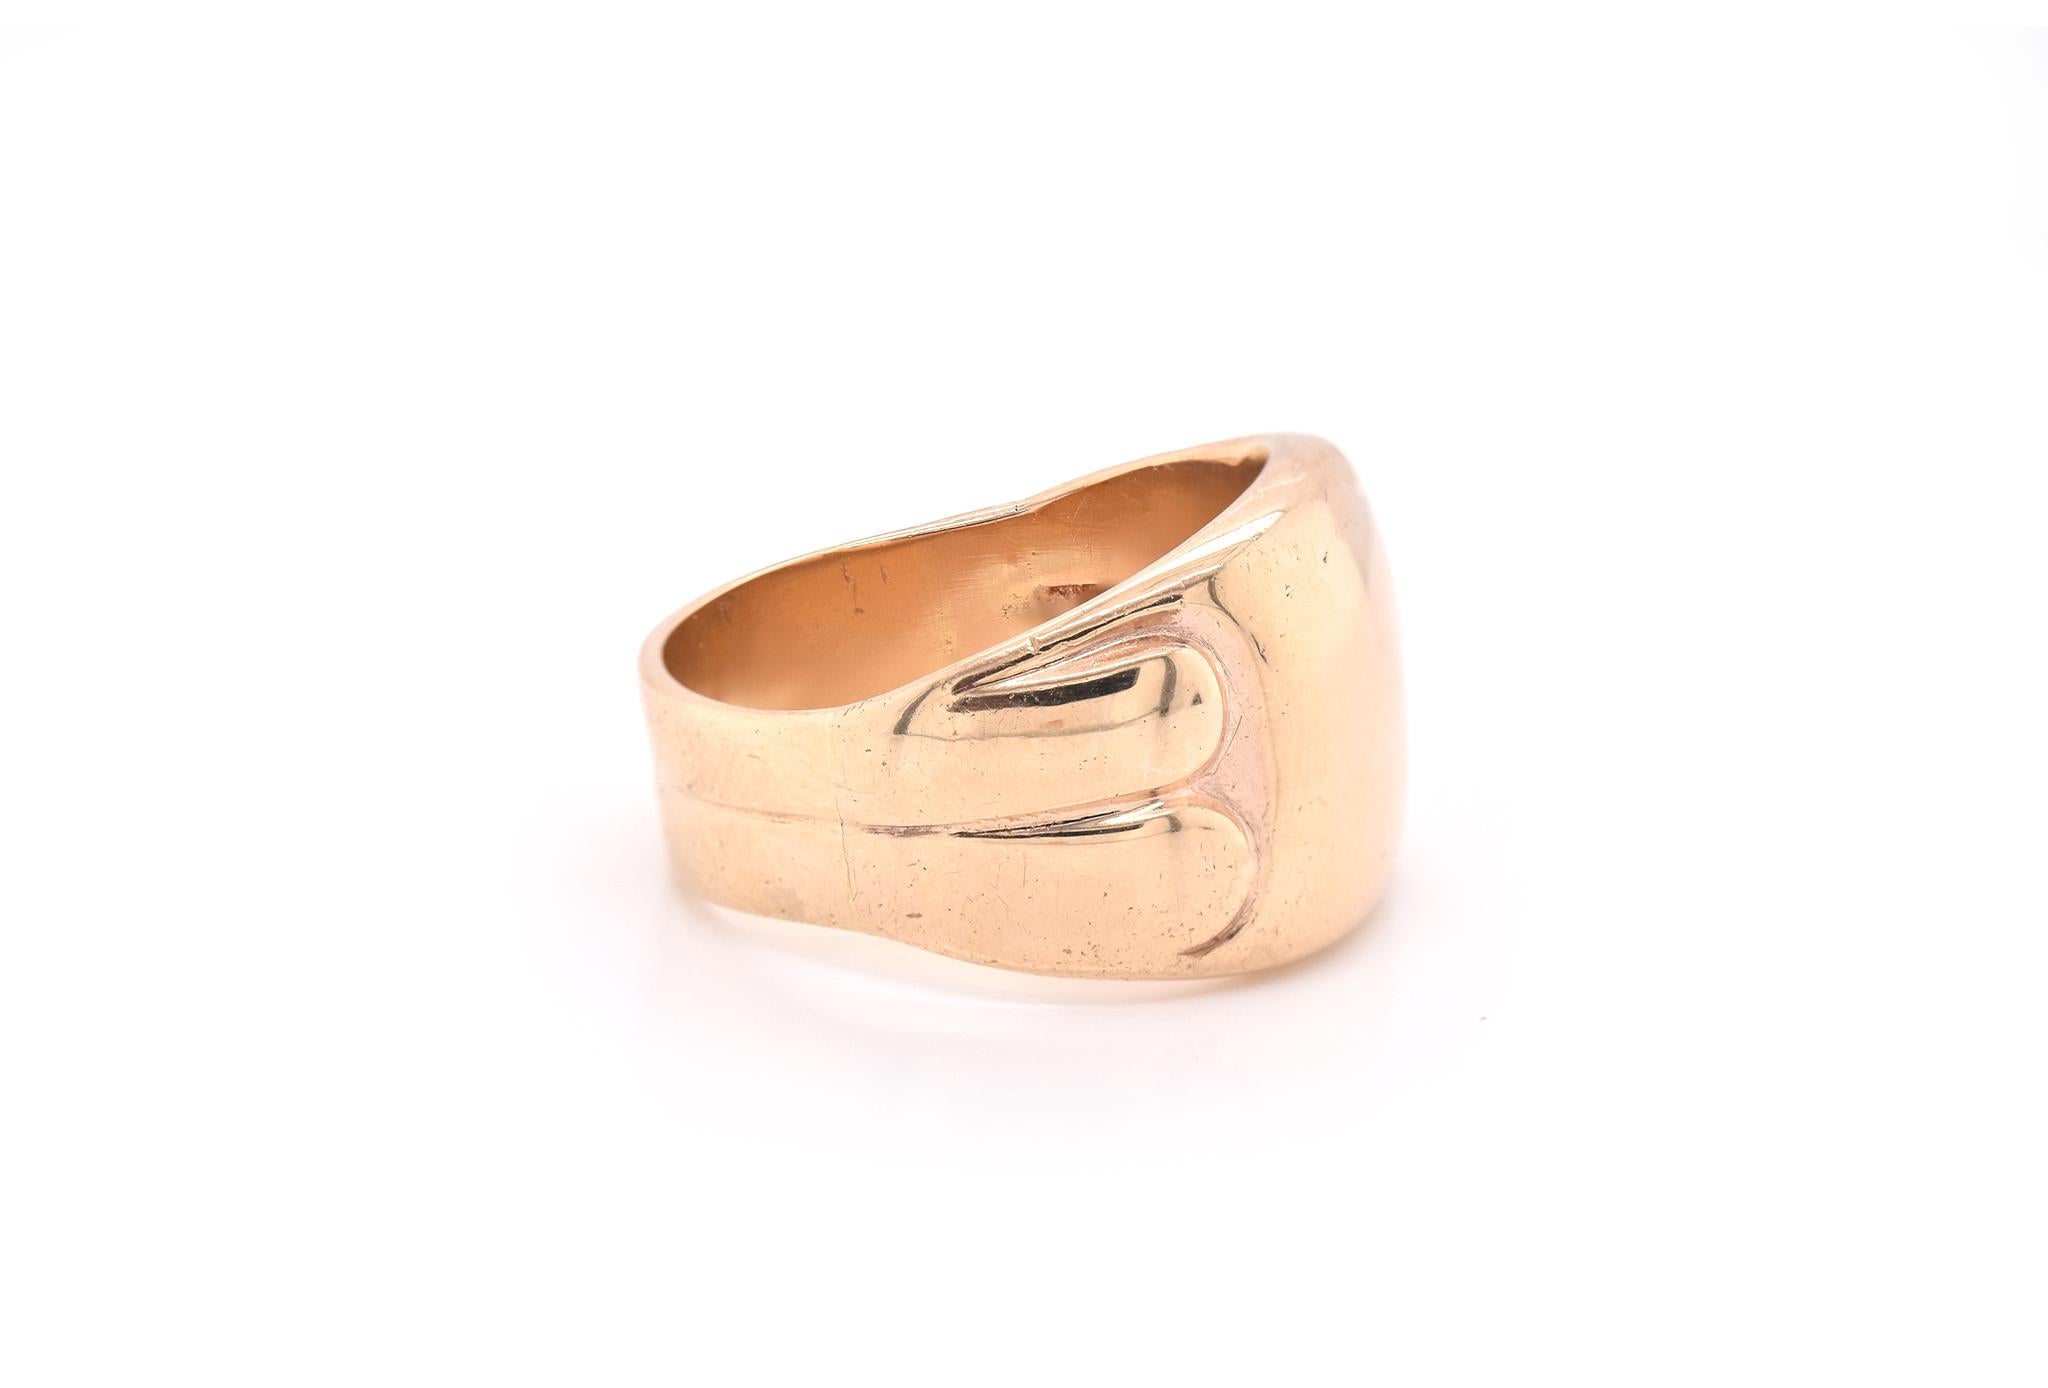 Material: 10k yellow gold
Size: 8 ½ (please allow two additional shipping days for sizing requests)
Dimensions: ring top measures 14.35mm in width
Weight: 11.88 grams
